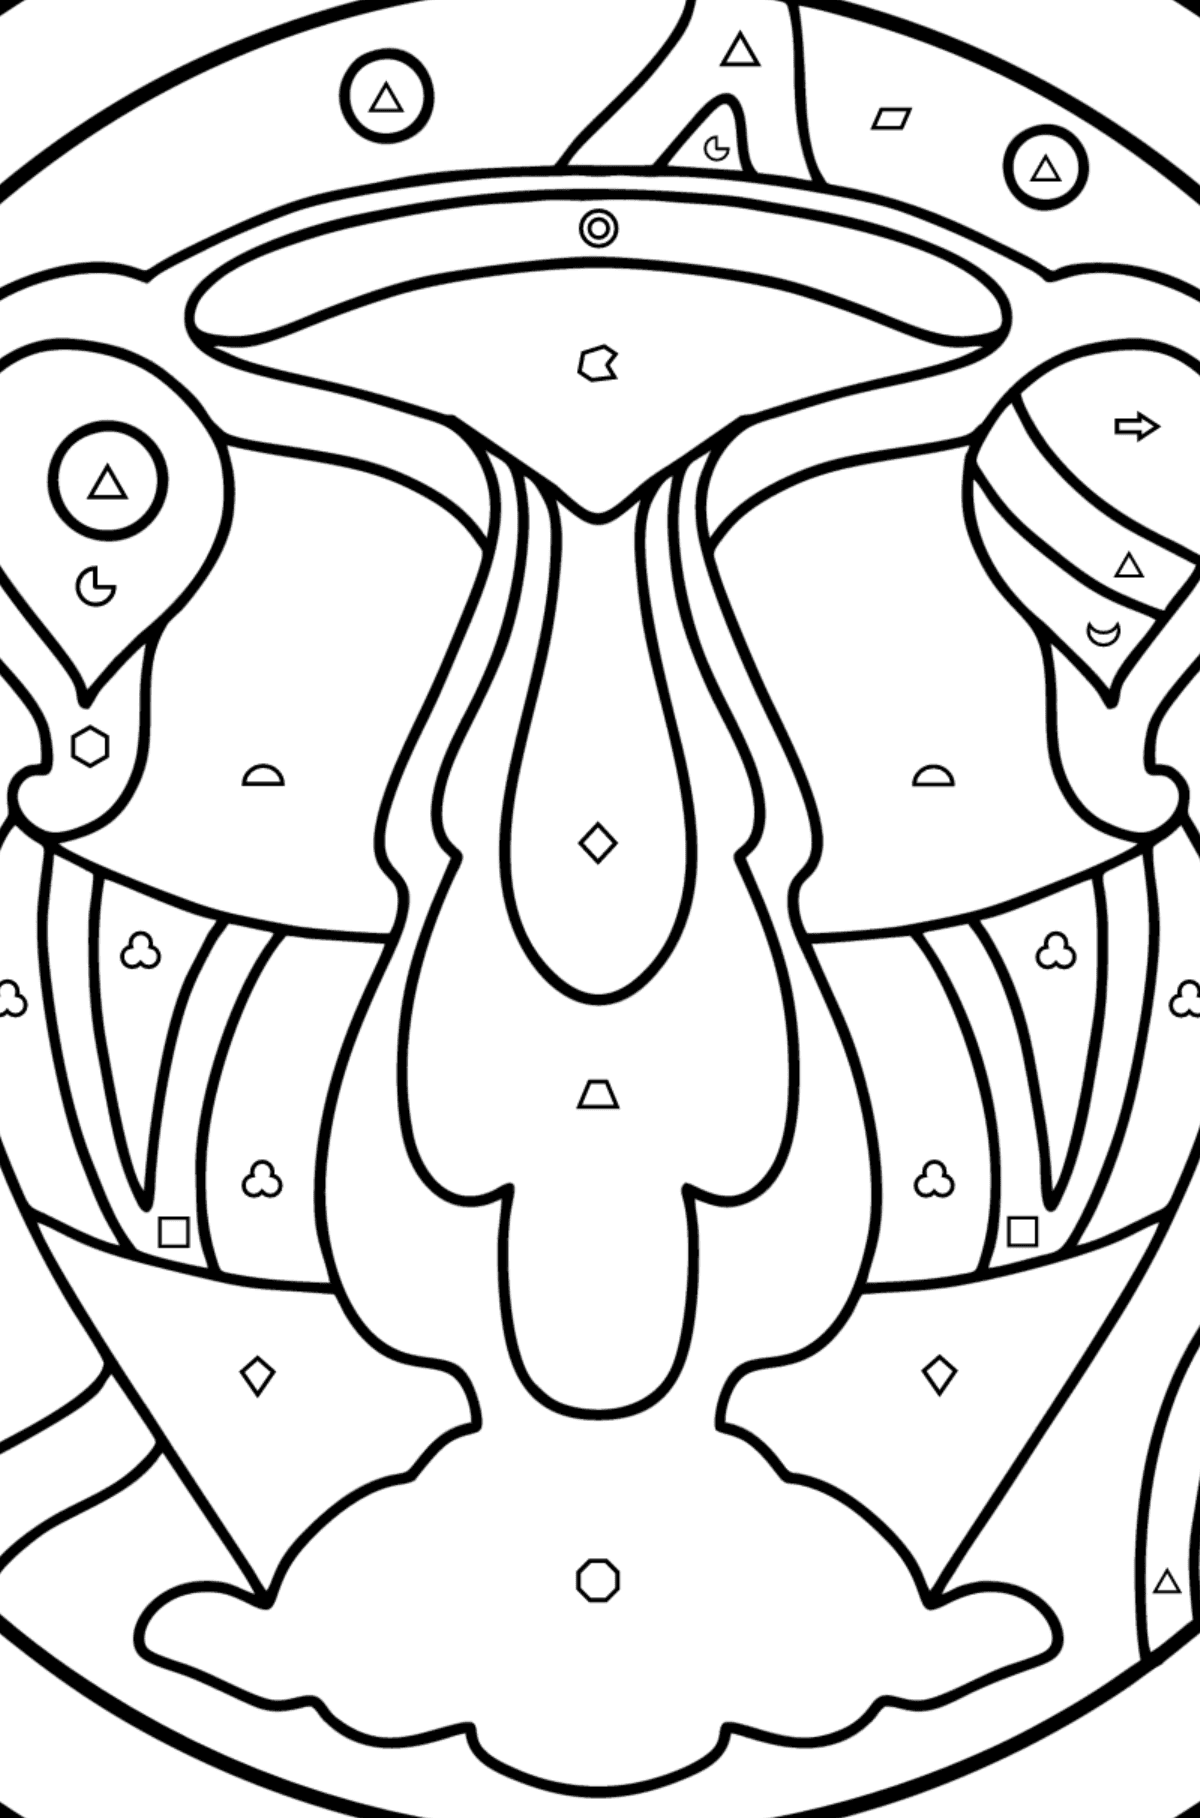 Coloring page for kids - zodiac sign Aquarius - Coloring by Geometric Shapes for Kids